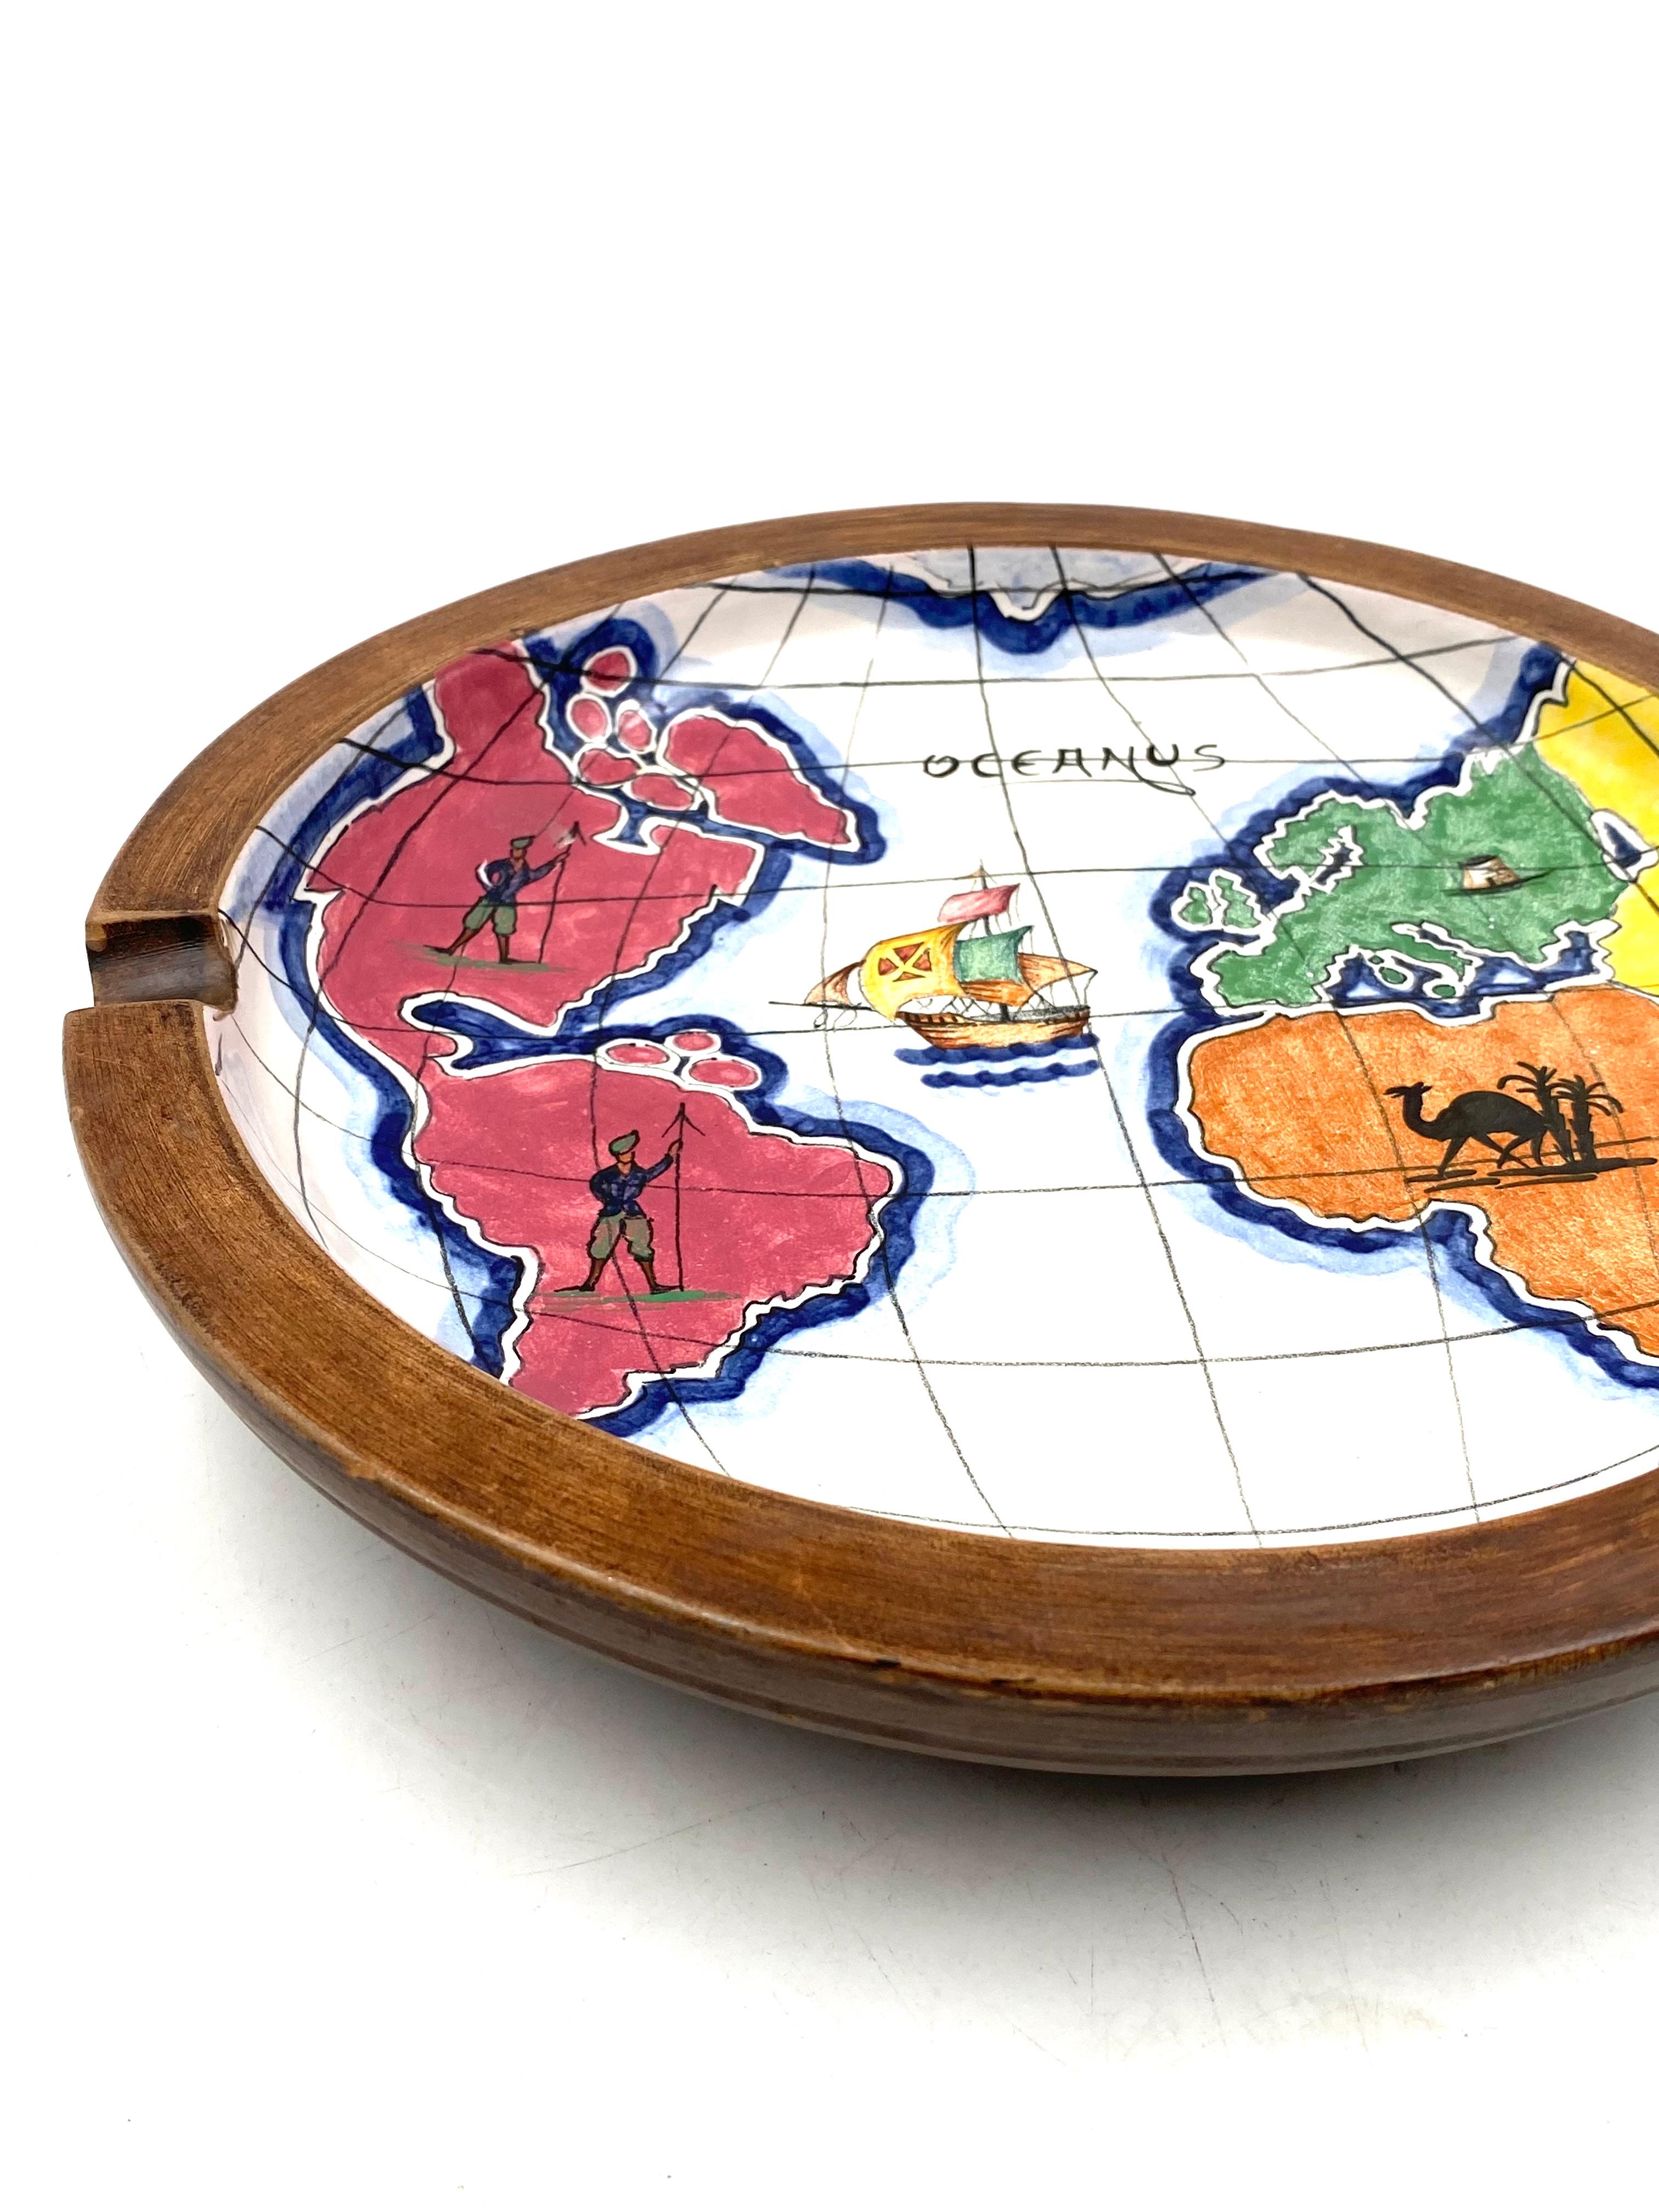 Polychrome Ceramic World Map Catchall / Ashtray, Zaccagnini, Italy, 1940s For Sale 6